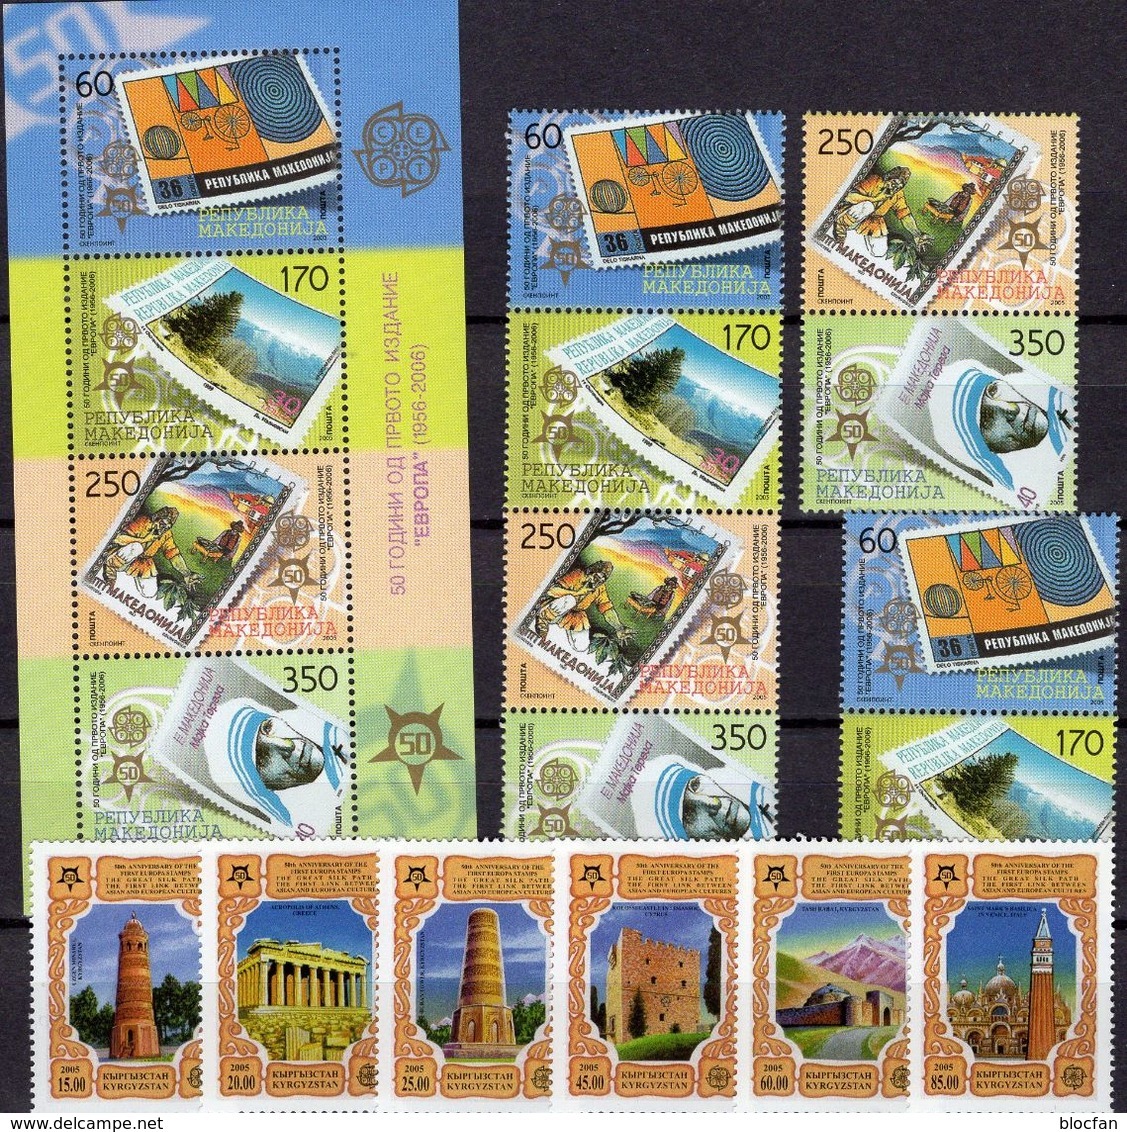 Akropolis Kirgistan 449/4+MAZEDONIEN 370/3 ZD,Block 13 ** 162€ Stamp On Stamps Blocs Ss Sheets M/s Bf 50 Years CEPT - Islam